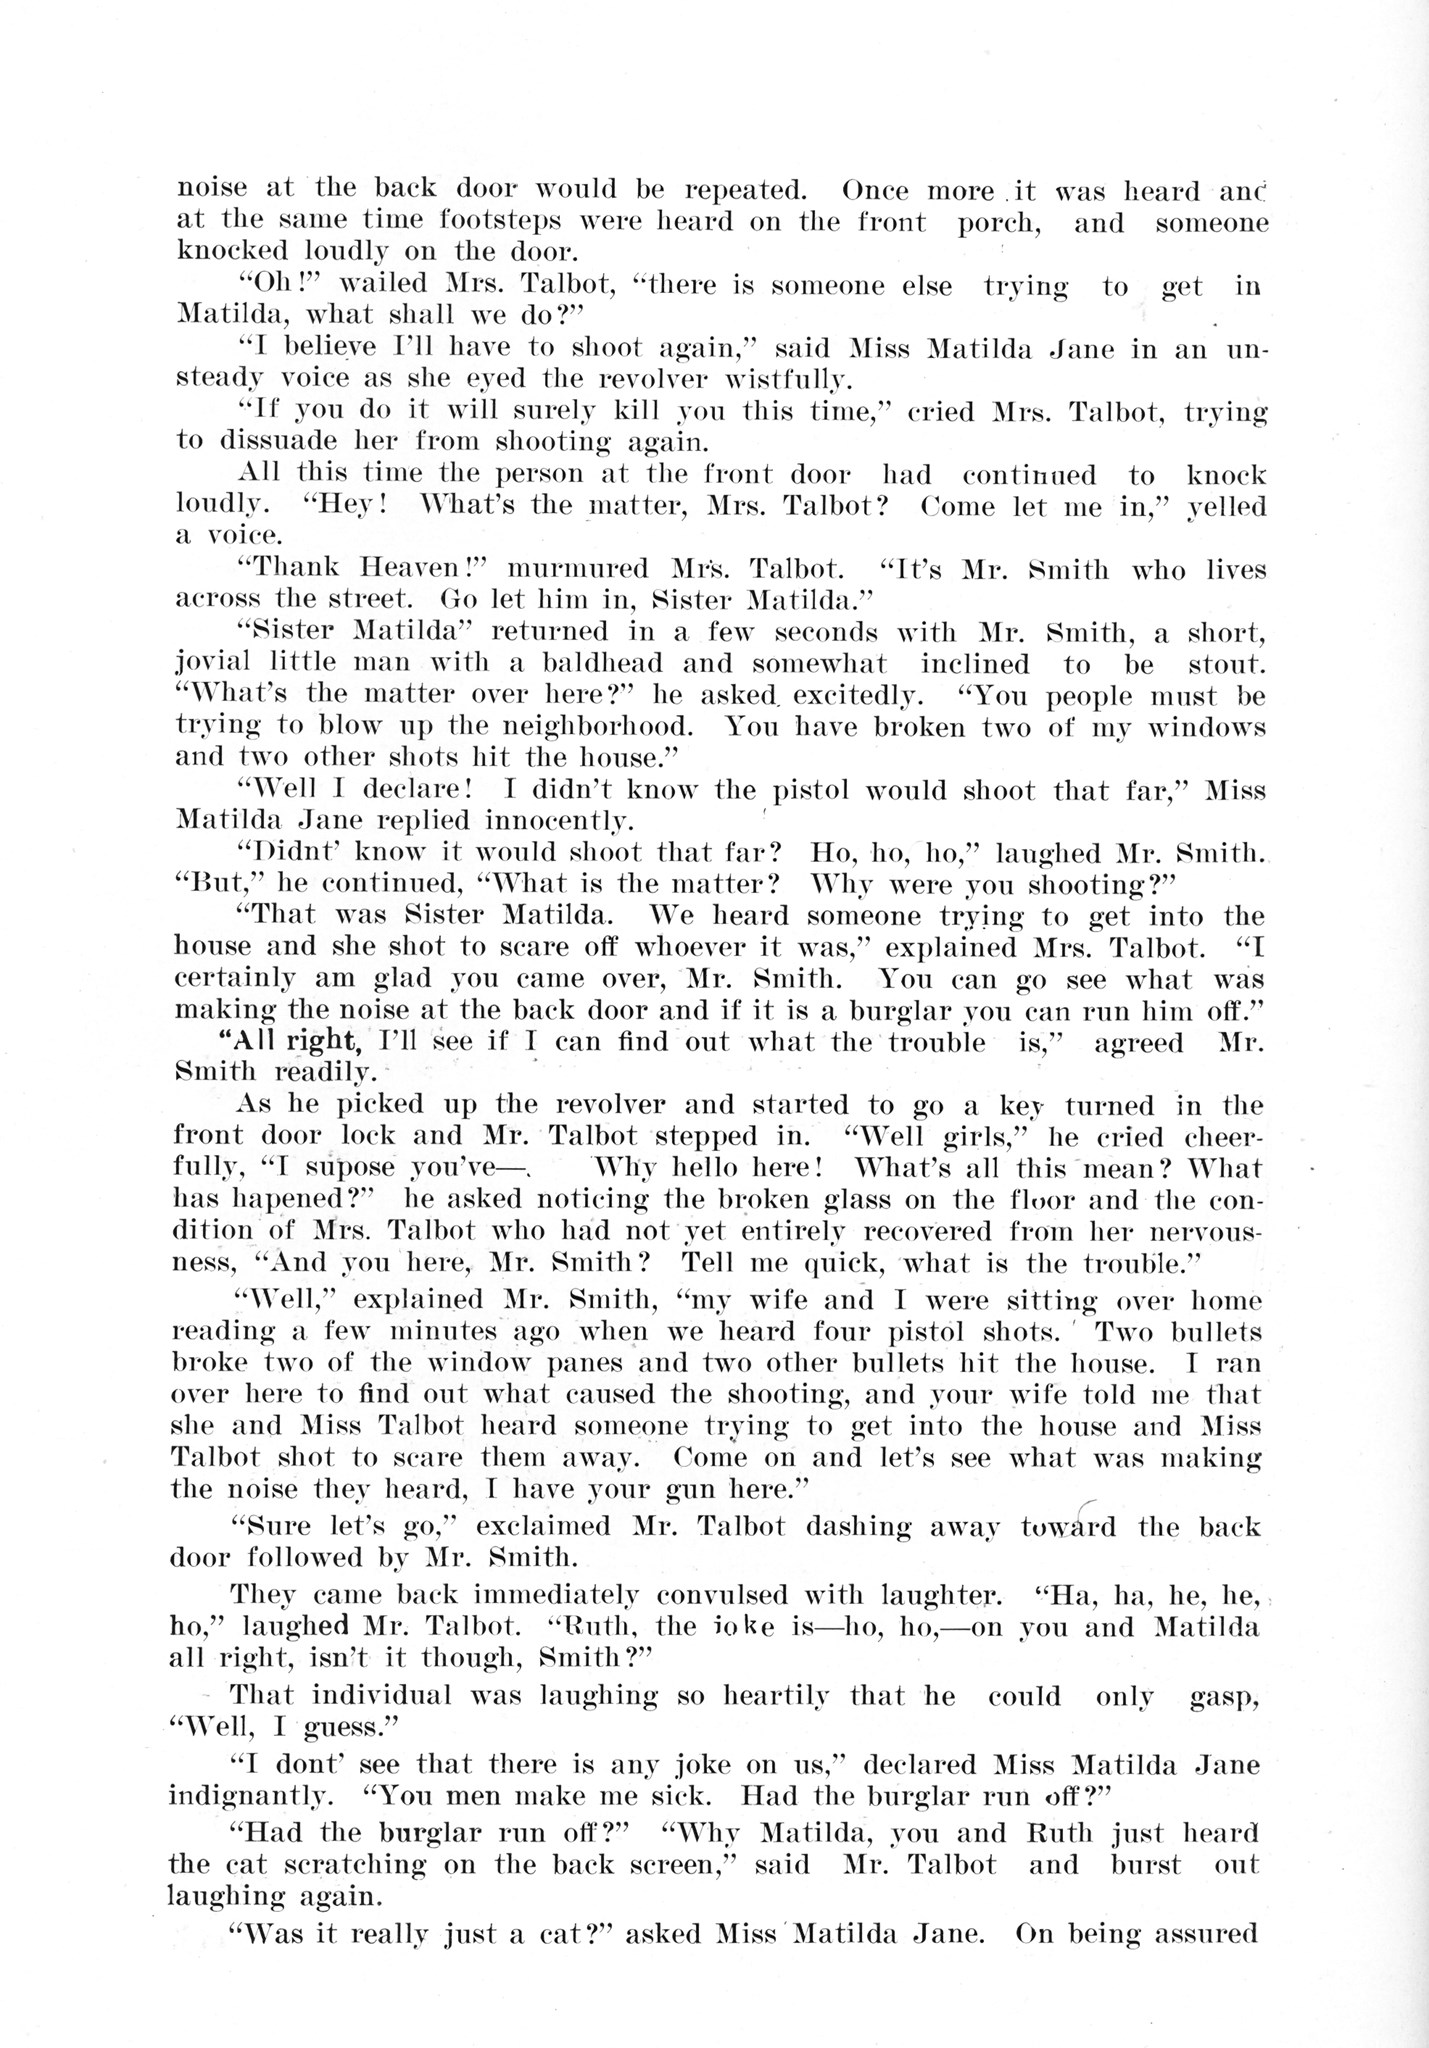 ../../../Images/Large/1913/Arclight-1913-pg0080.jpg